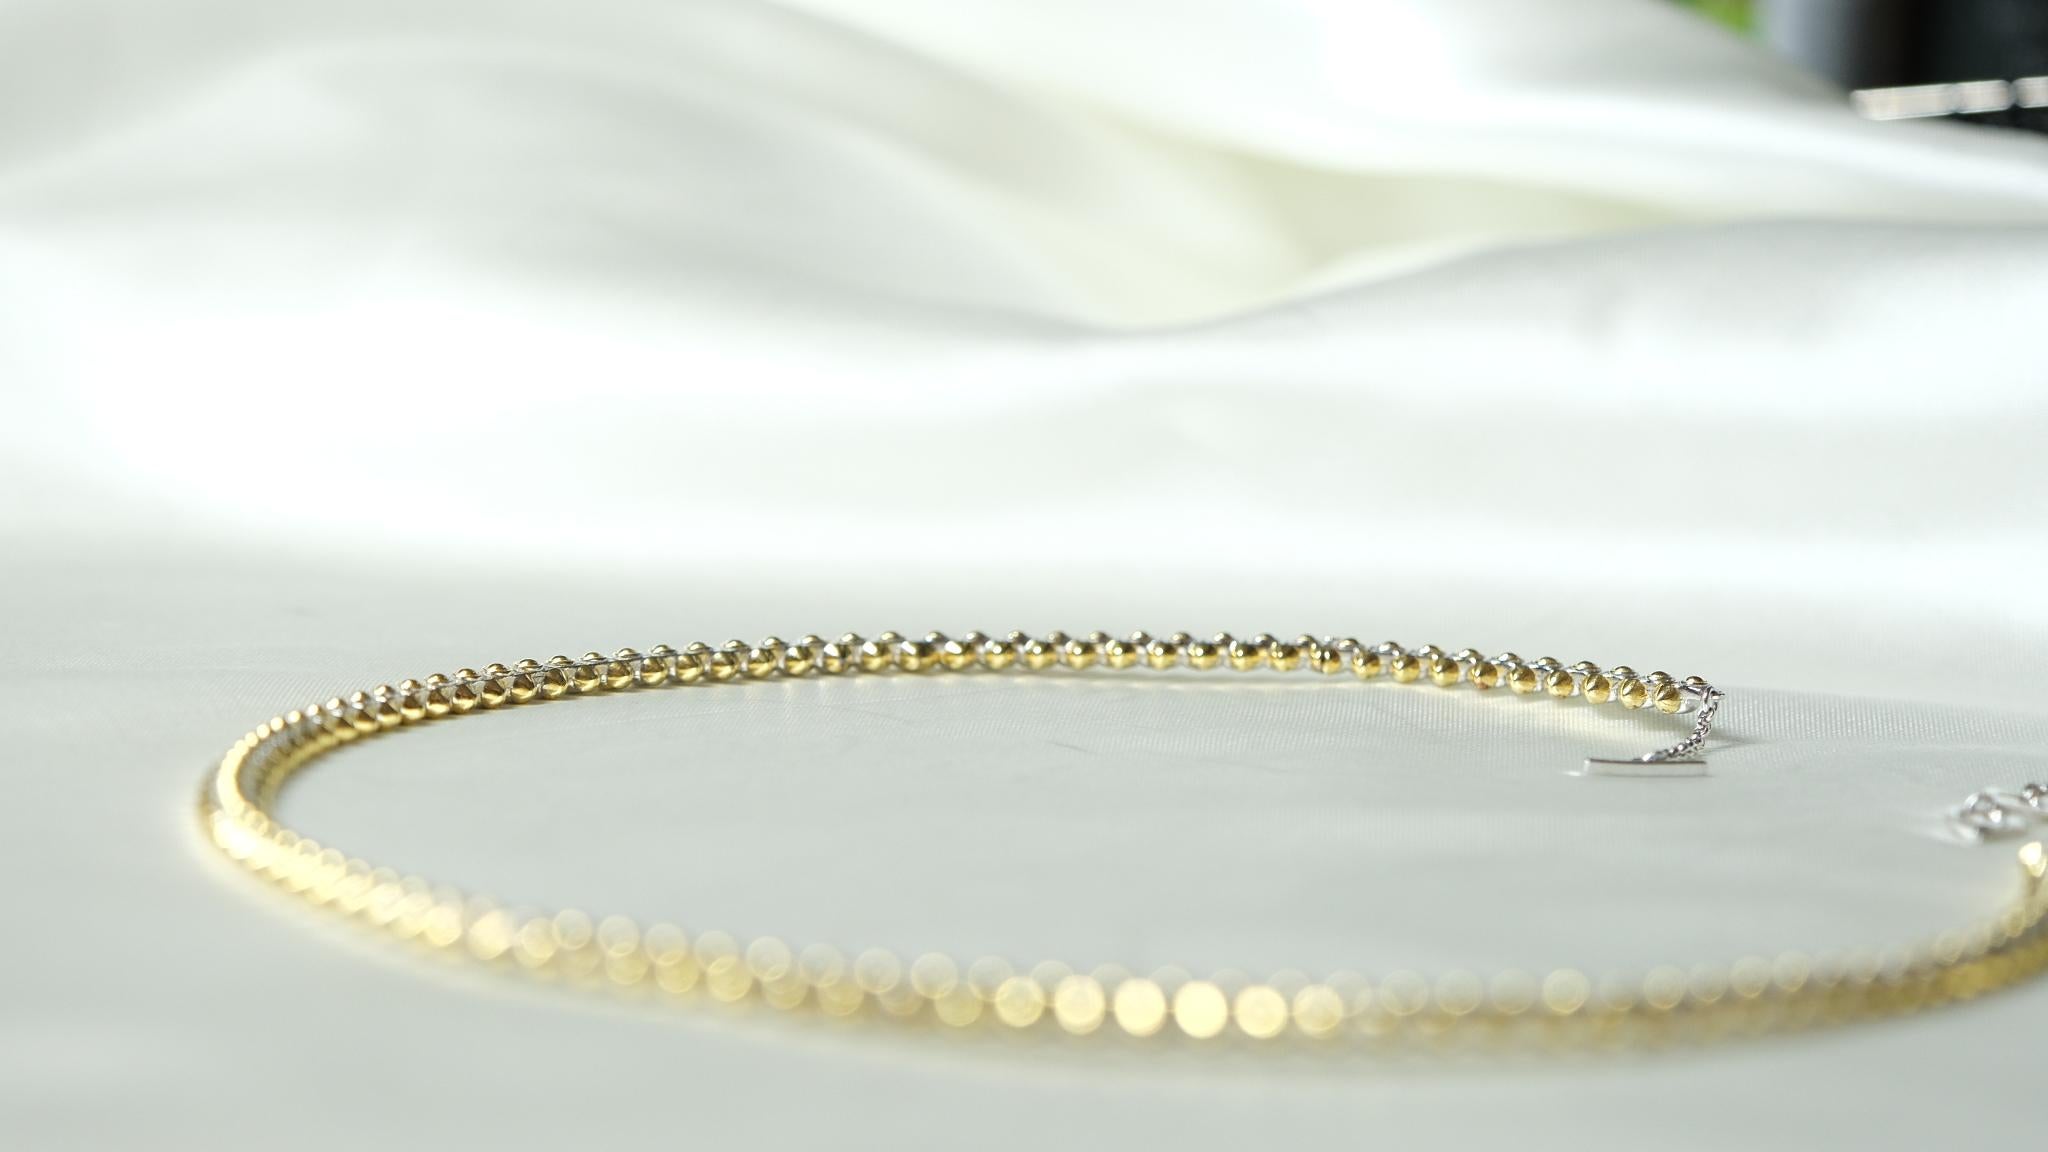 Serendipity Necklace, 18k Yellow Gold/White Gold For Sale 2